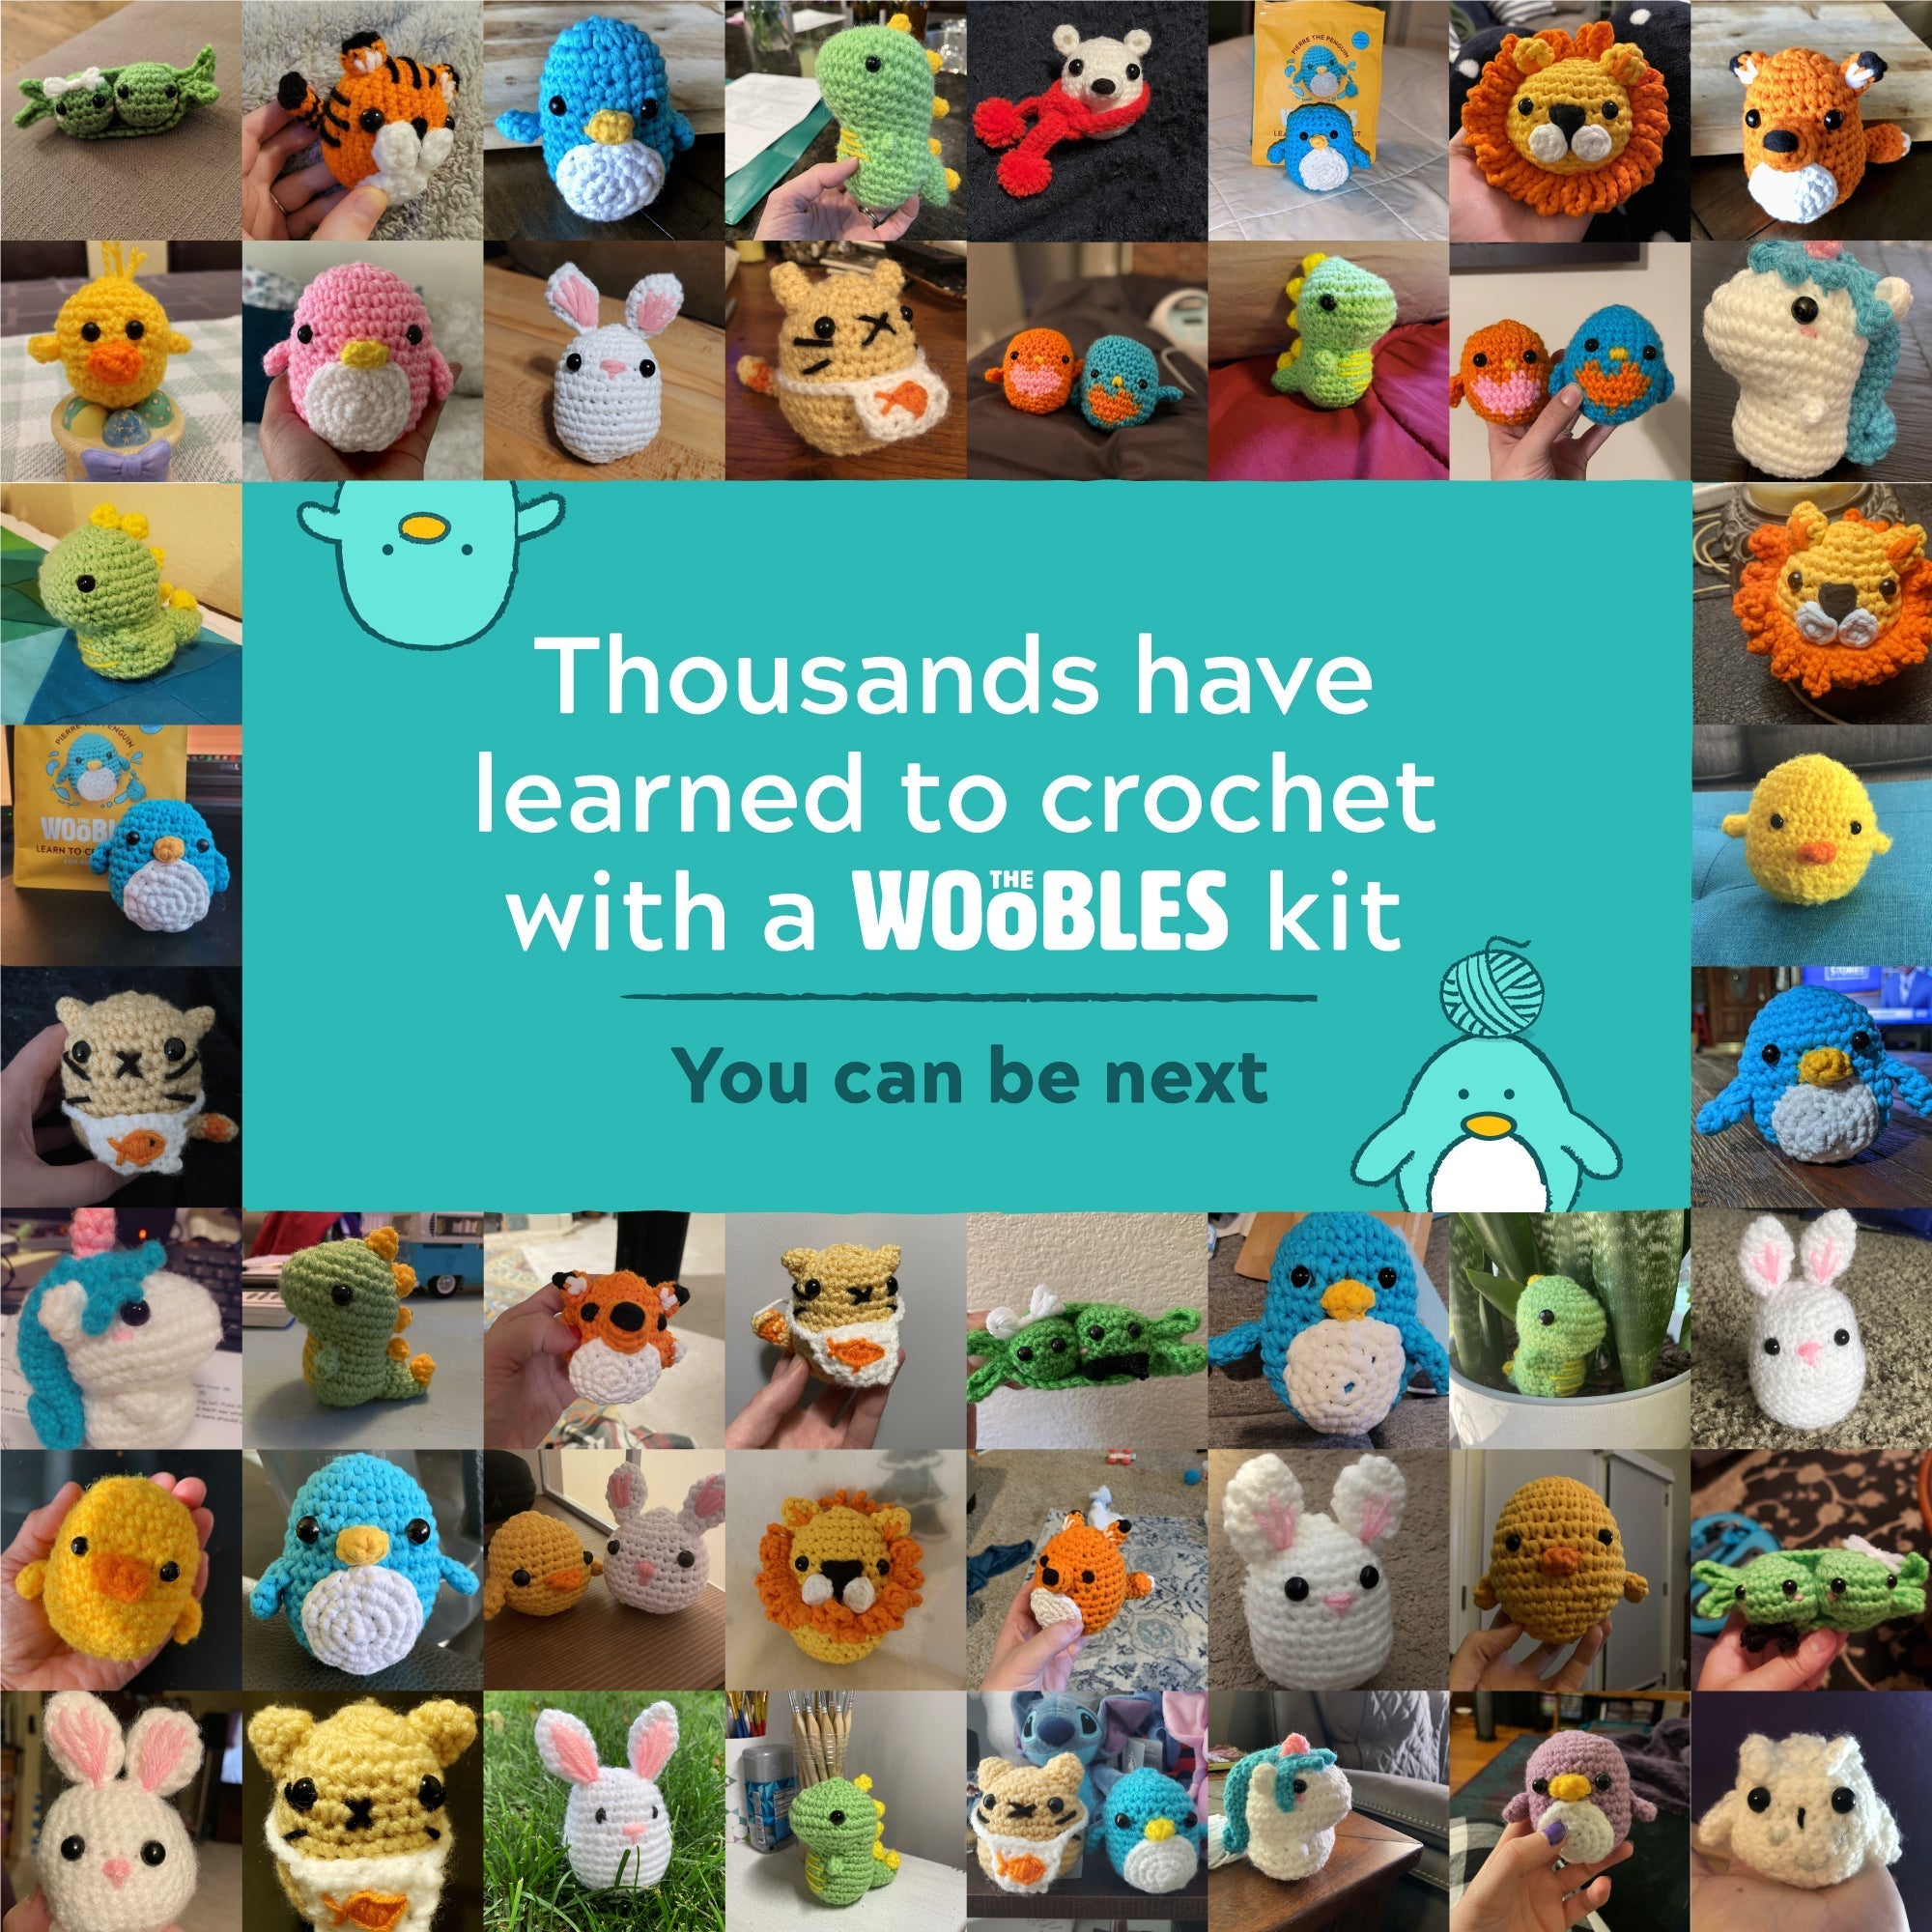 We may not have caught our Woobles, but we hope you can catch the exci